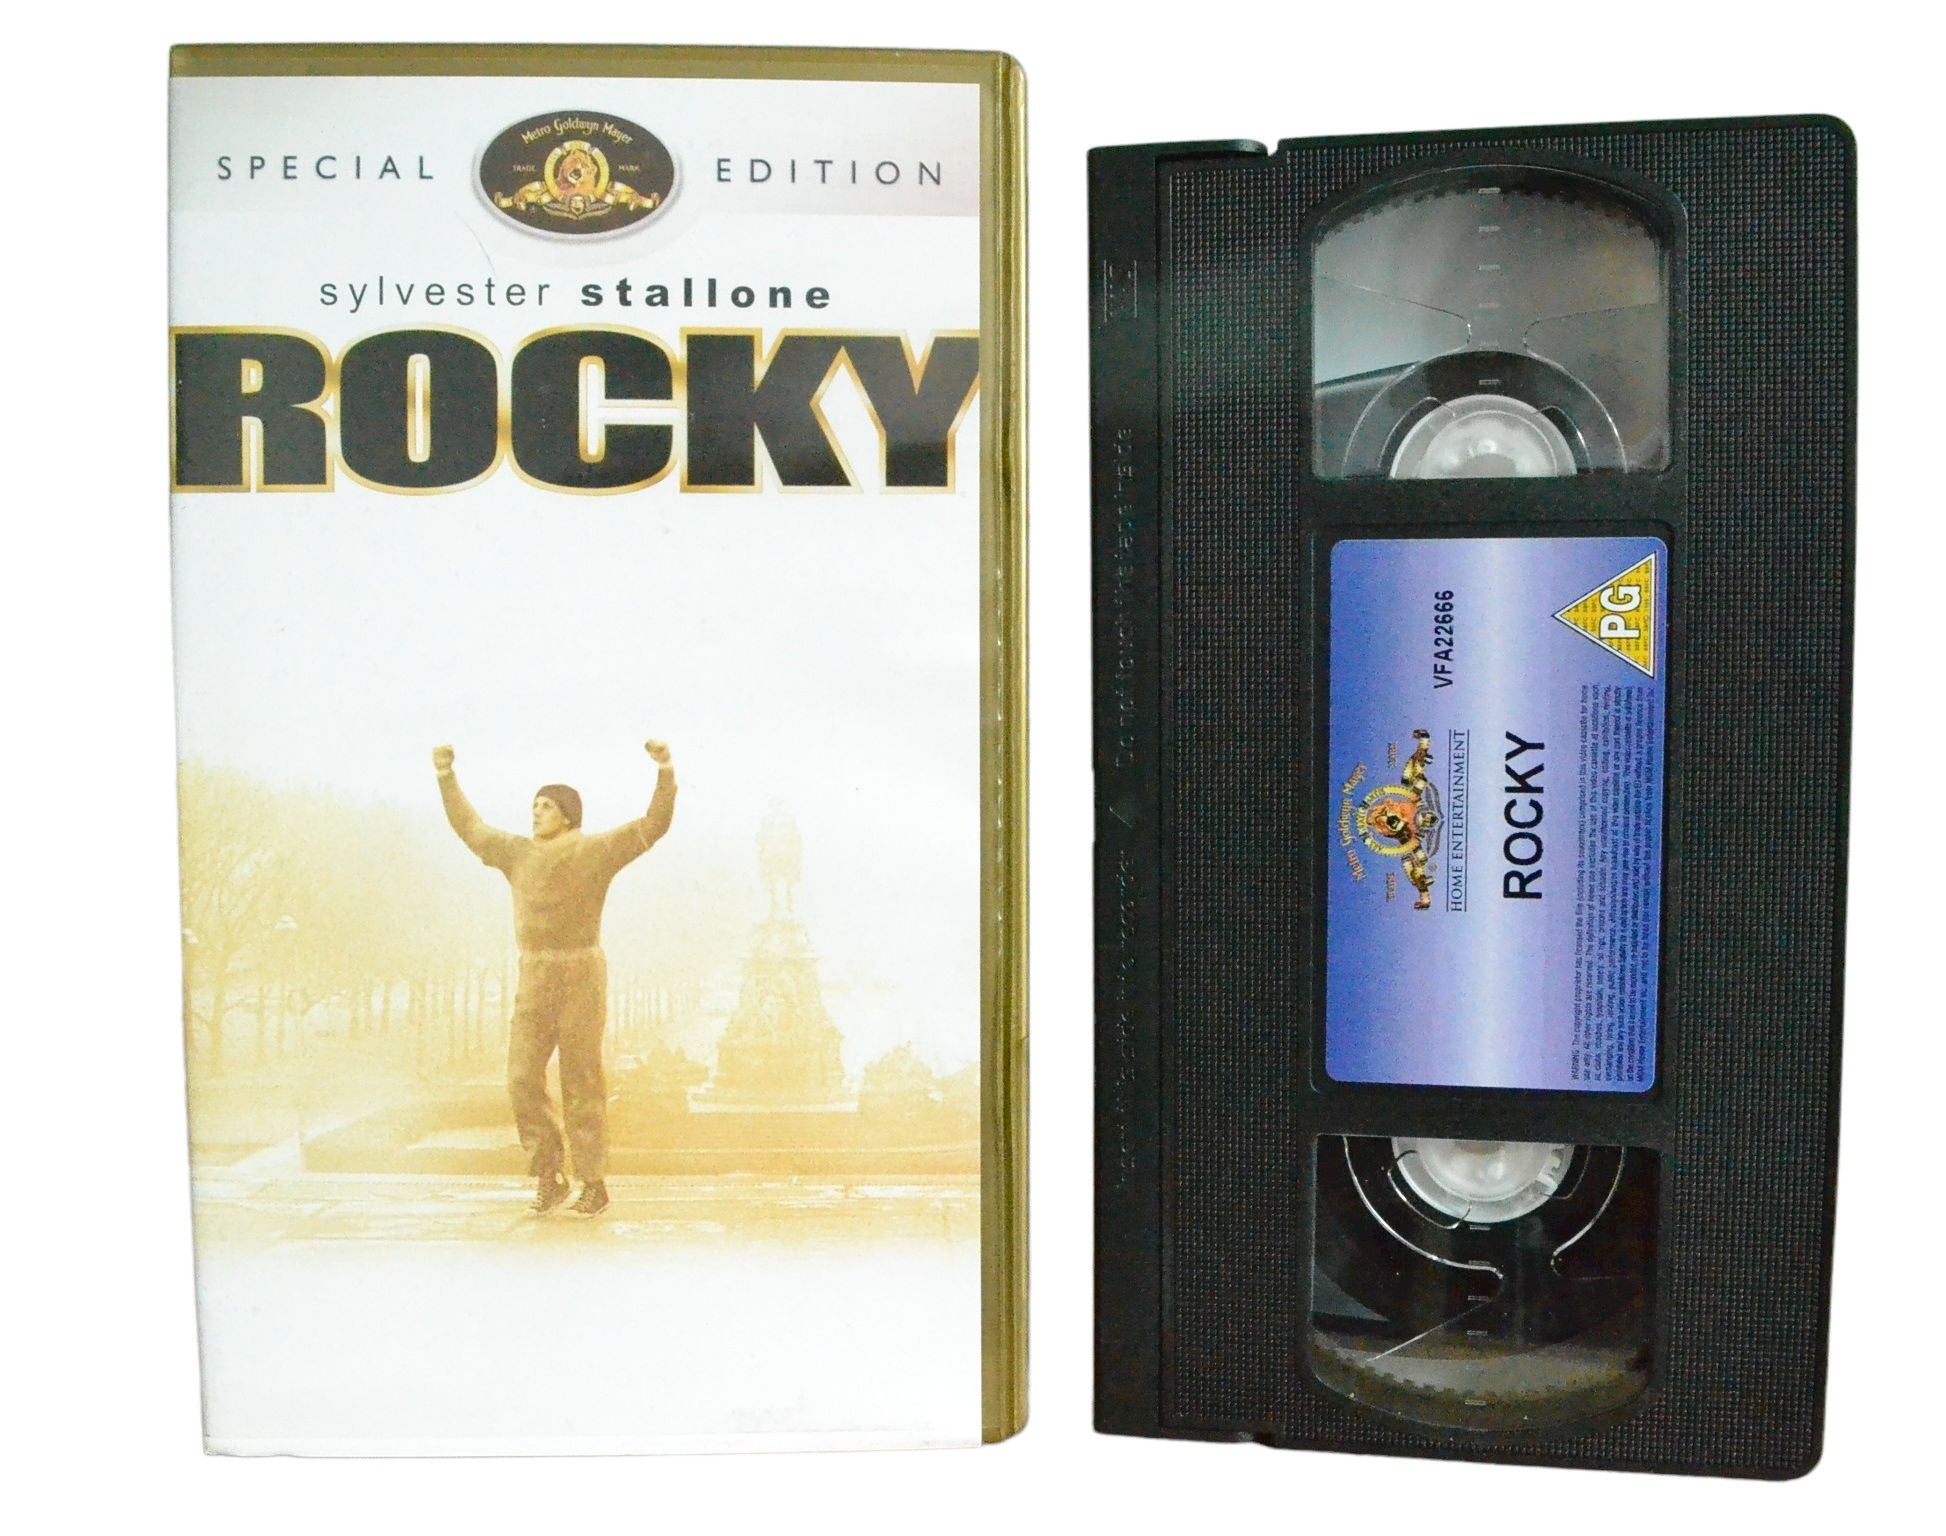 Rocky (Special Edition) - Sylvester Stallone - Metro-Goldwyn-Mayer Home Entertainment - Brand New Sealed - Pal VHS-